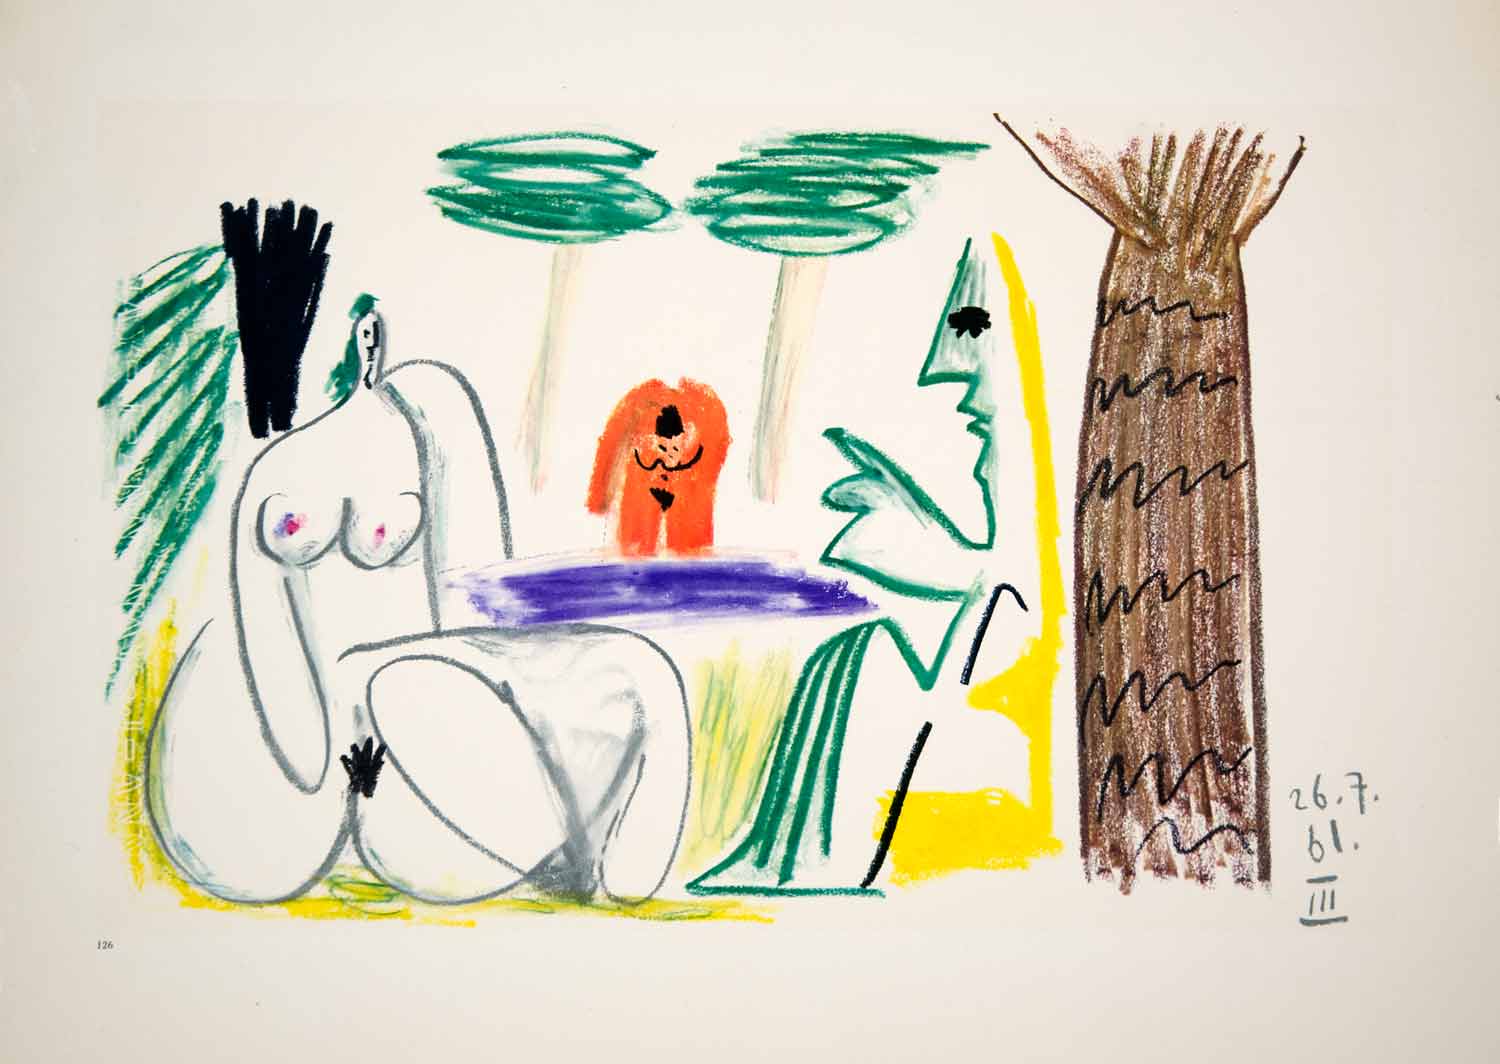 1962 Photolithograph Picasso Nude Figures Abstract Dejeuner sur l'herbe 26.7.61